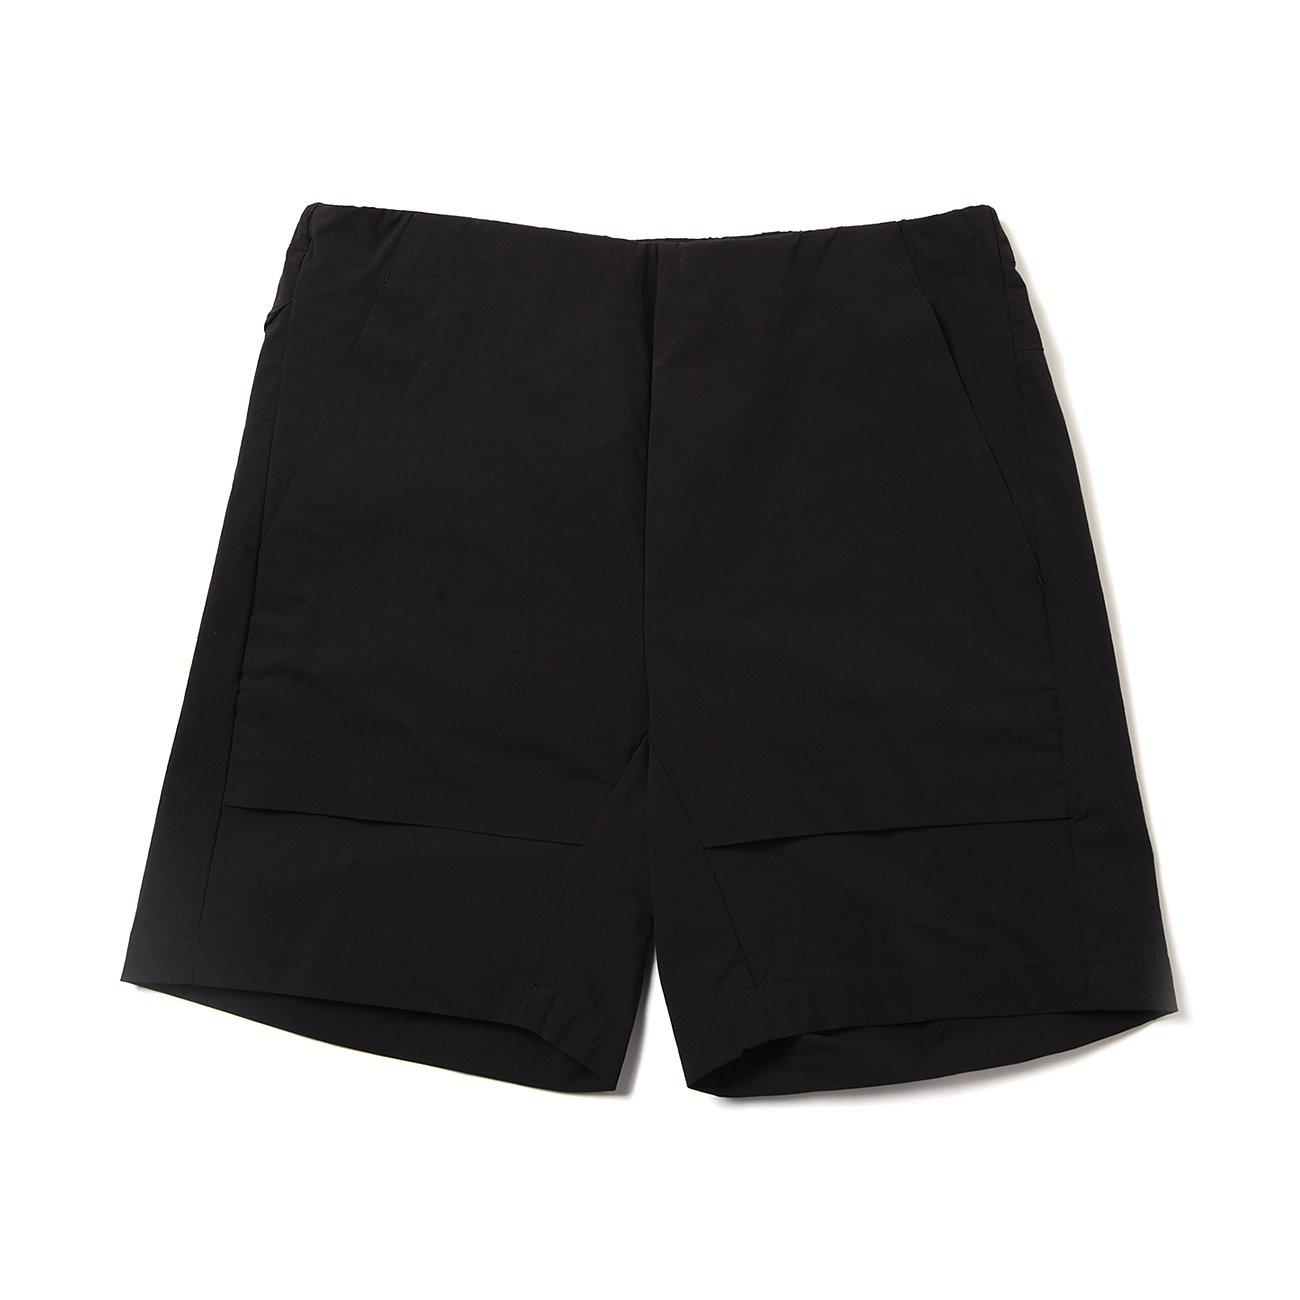 DESCENTE PAUSE / デサントポーズ | WATER SHORTS - Black | 通販